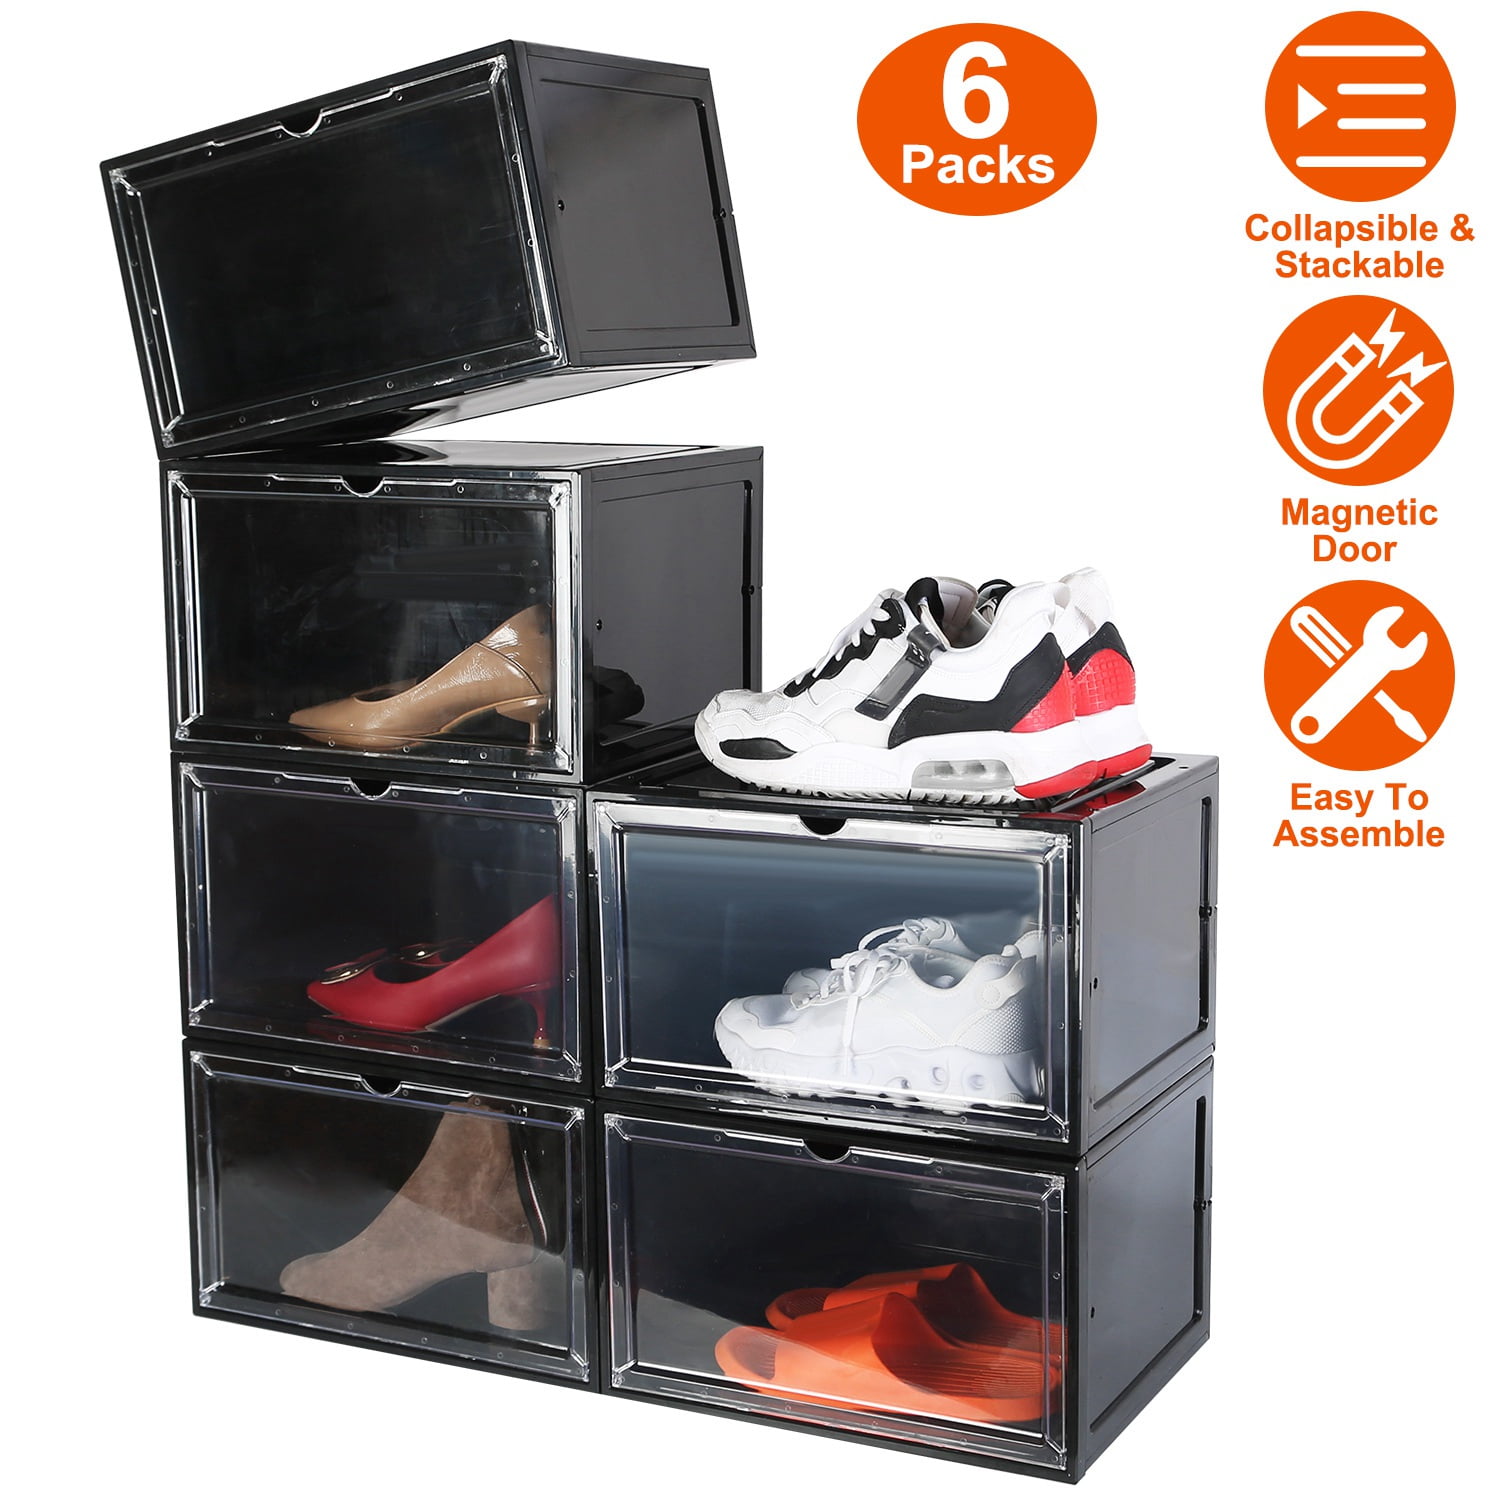 cakraie 10 Pack Thicken Shoe Organizer Stackable,Upgraded Sturdy Shoe  Storage Box with Magnetic Door,Shoe Containers For Sneaker Display,Hat